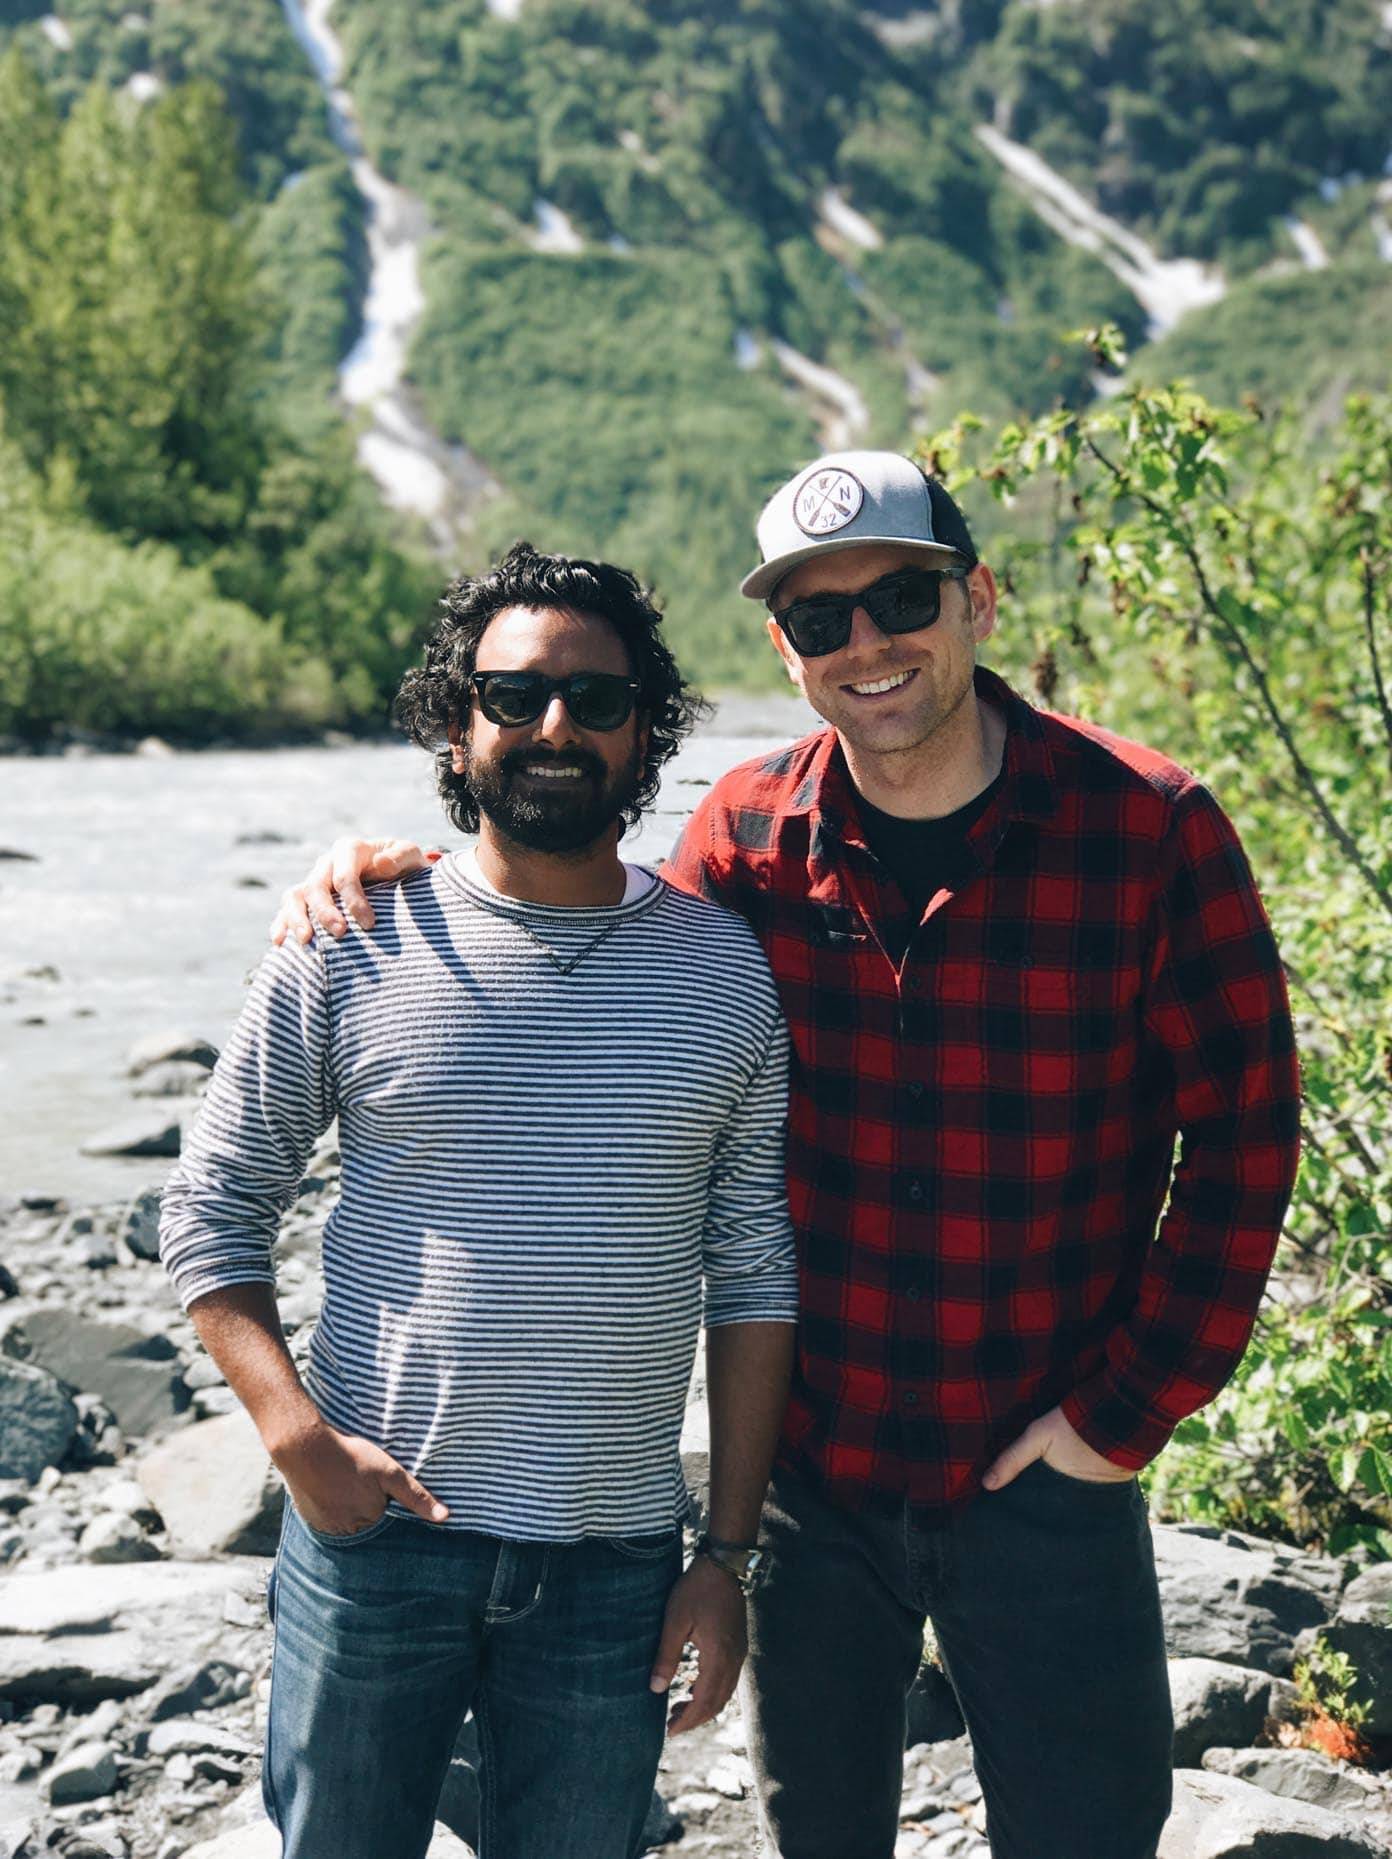 Two men wearing sunglasses on a rocky path.